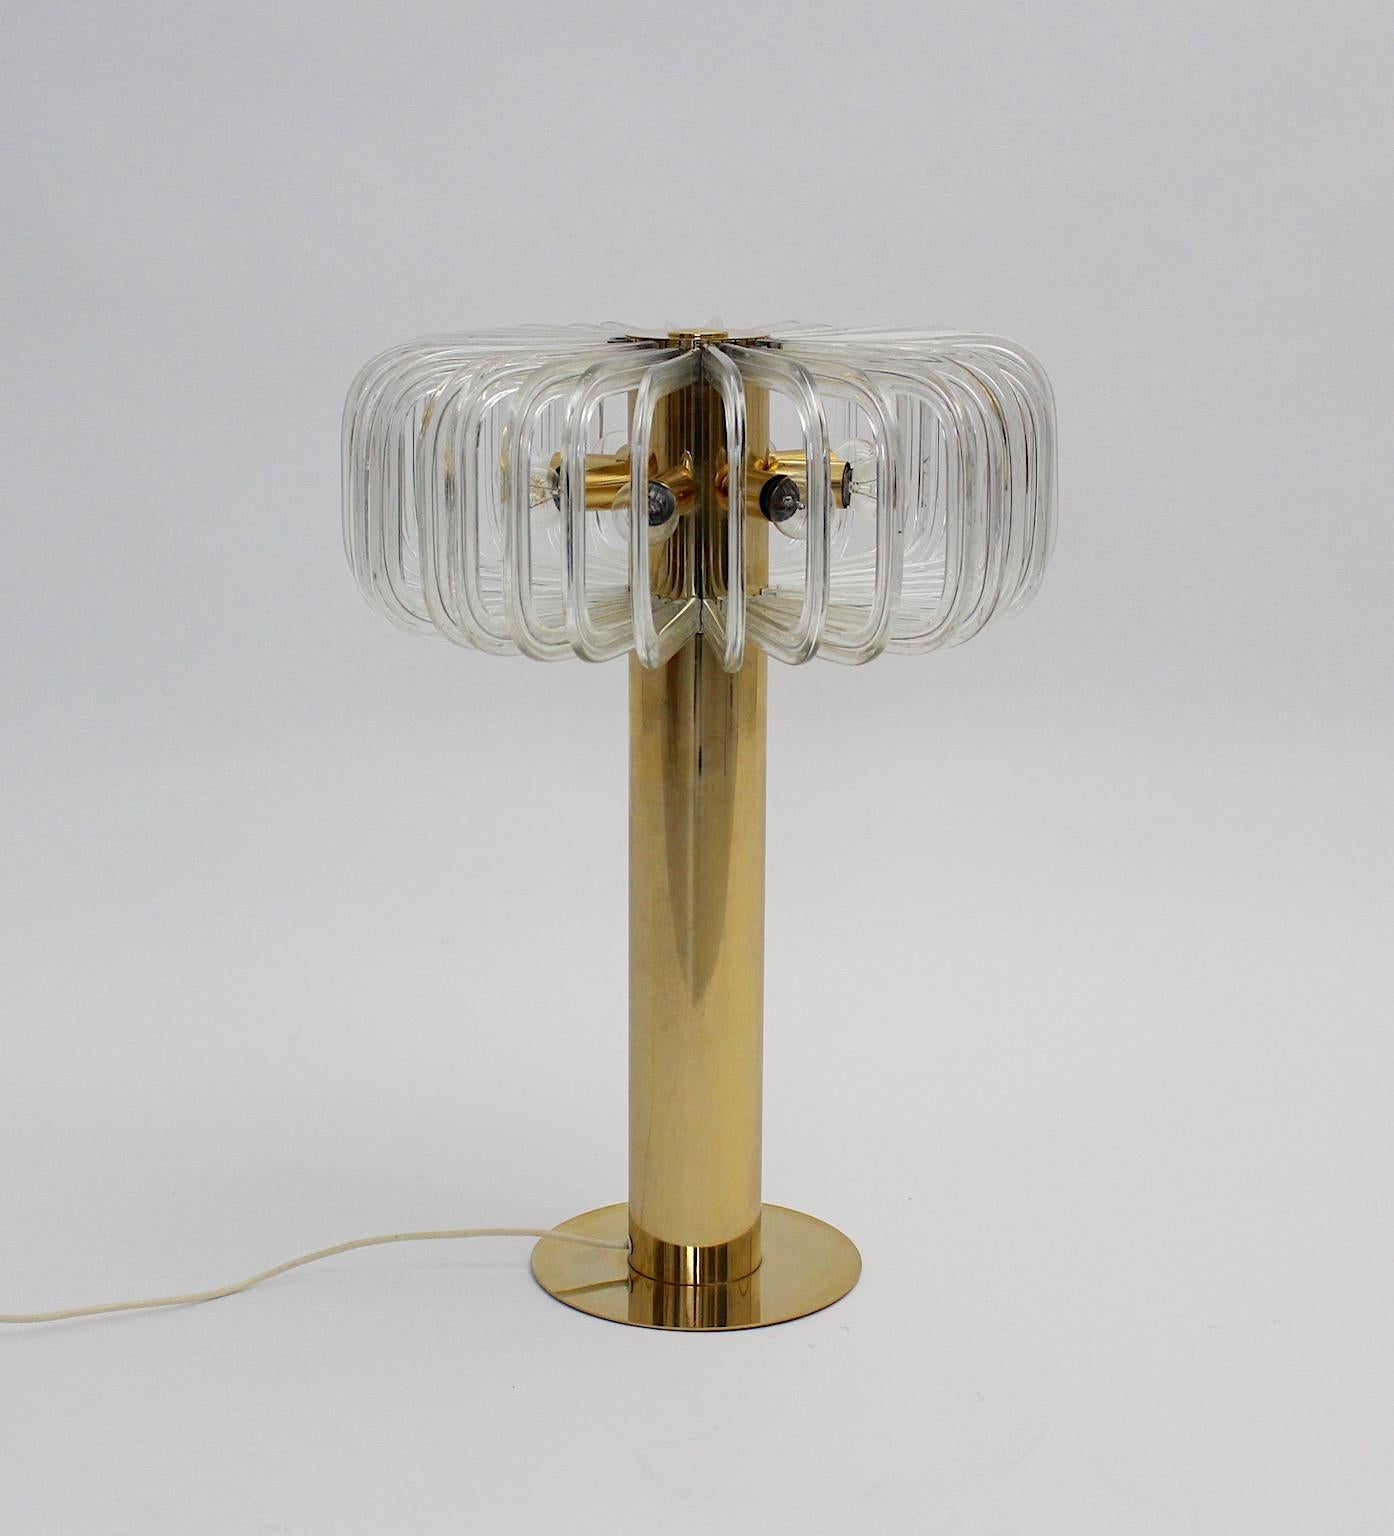 Mid Century Modern vintage table lamp from brass and glass by Cari Zalloni 1960s for Bakalowits Vienna. This gilded brass table lamp Mod. Quazar shows high-quality and impresses through its heavy precious gilded brass base and its 32 curved clear